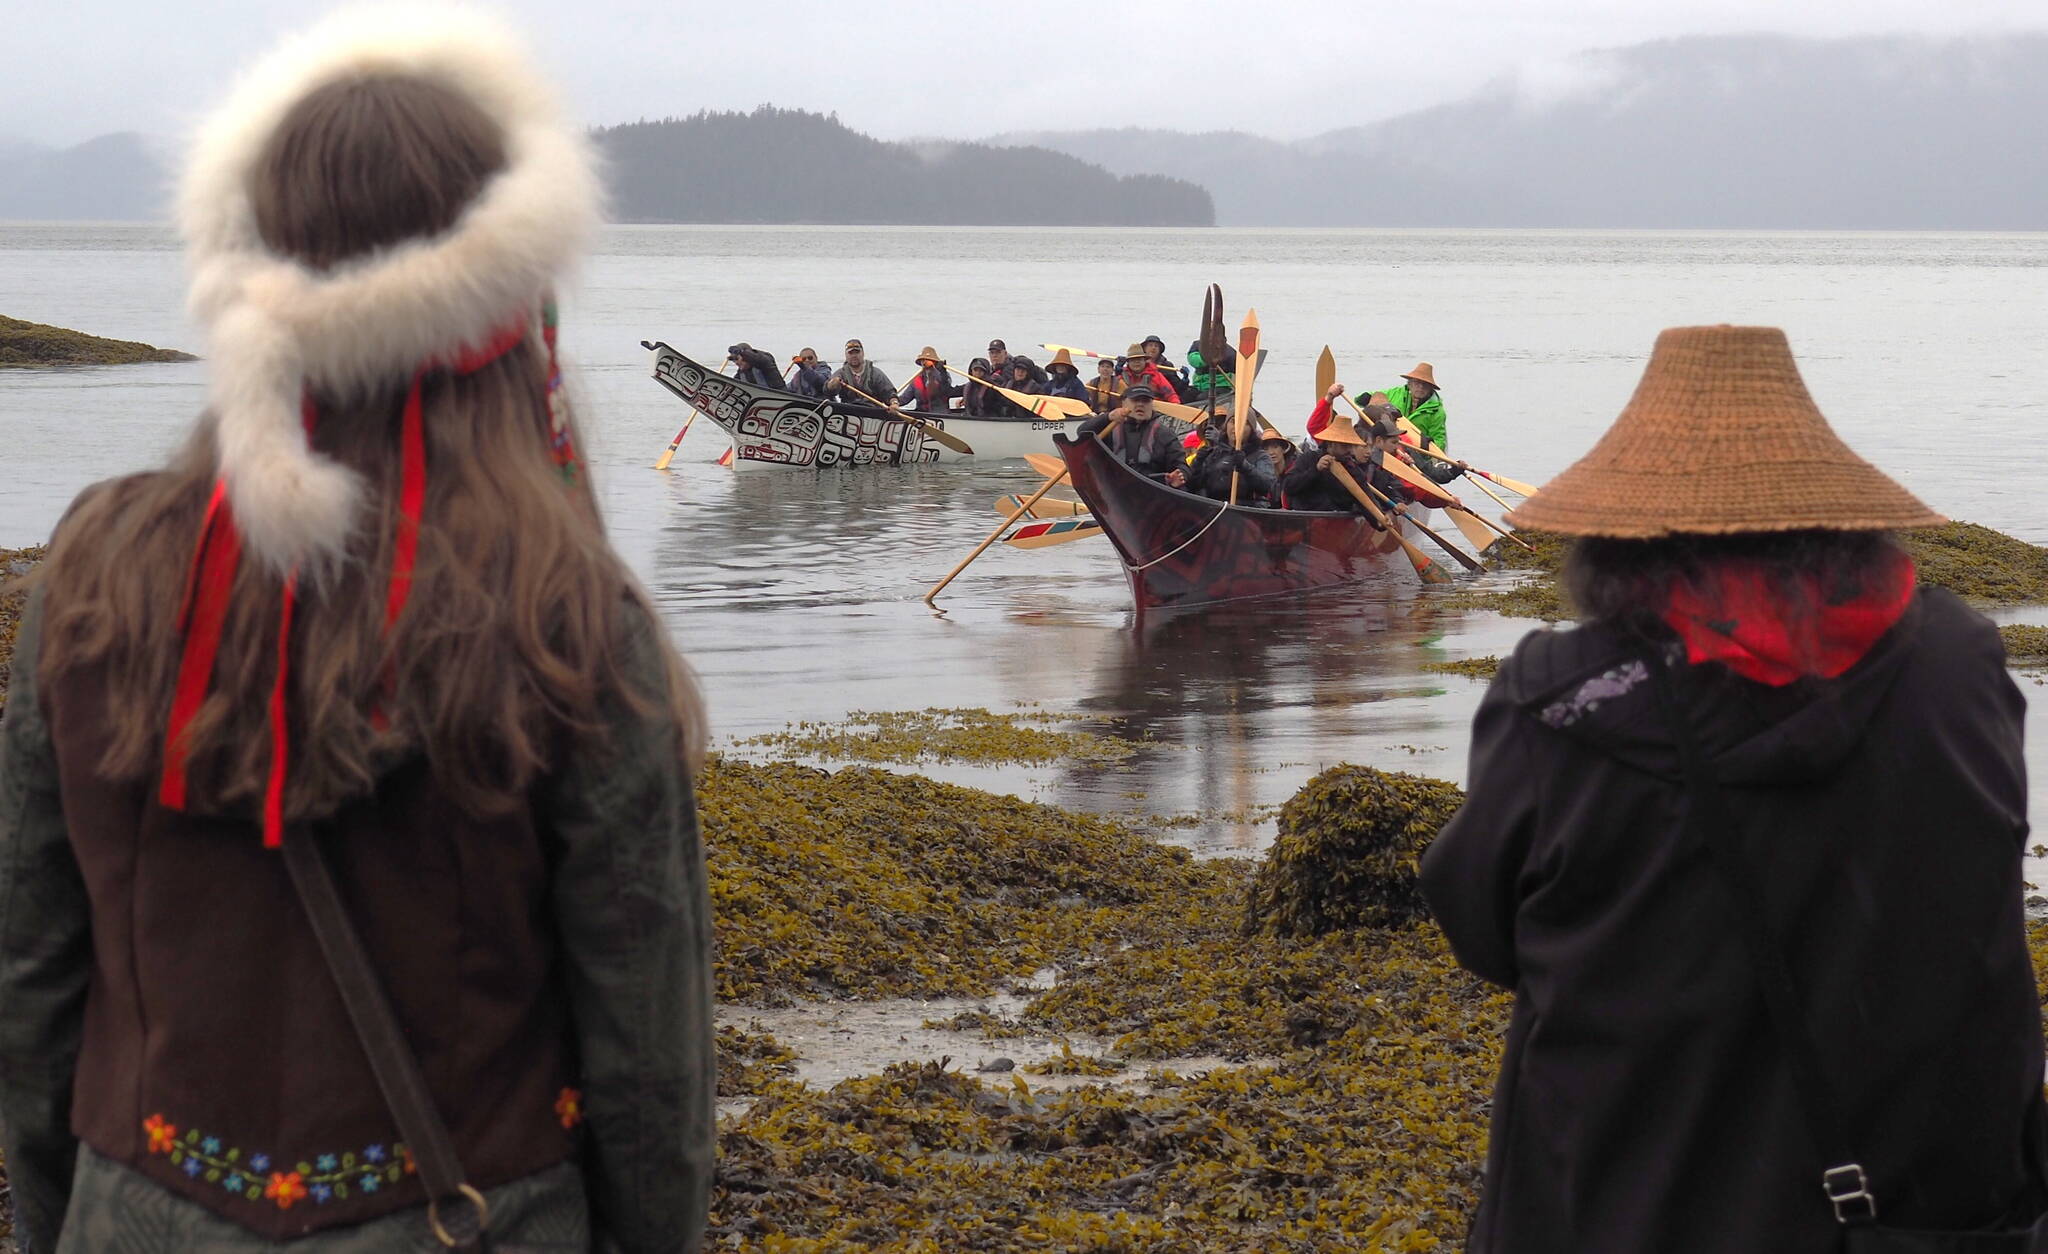 Anchorage pullers arrived at Wrangell’s Petroglyph Beach on May 23 for a canoe-naming ceremony. One of the canoes they will paddle to Juneau was dedicated to Wrangell’s Marge Byrd, Kiks.adi matriarch Shaawat Shoogoo. The canoe’s name is Xíxch’ dexí (Frog Backbone). (Becca Clark / Wrangell Sentinel)